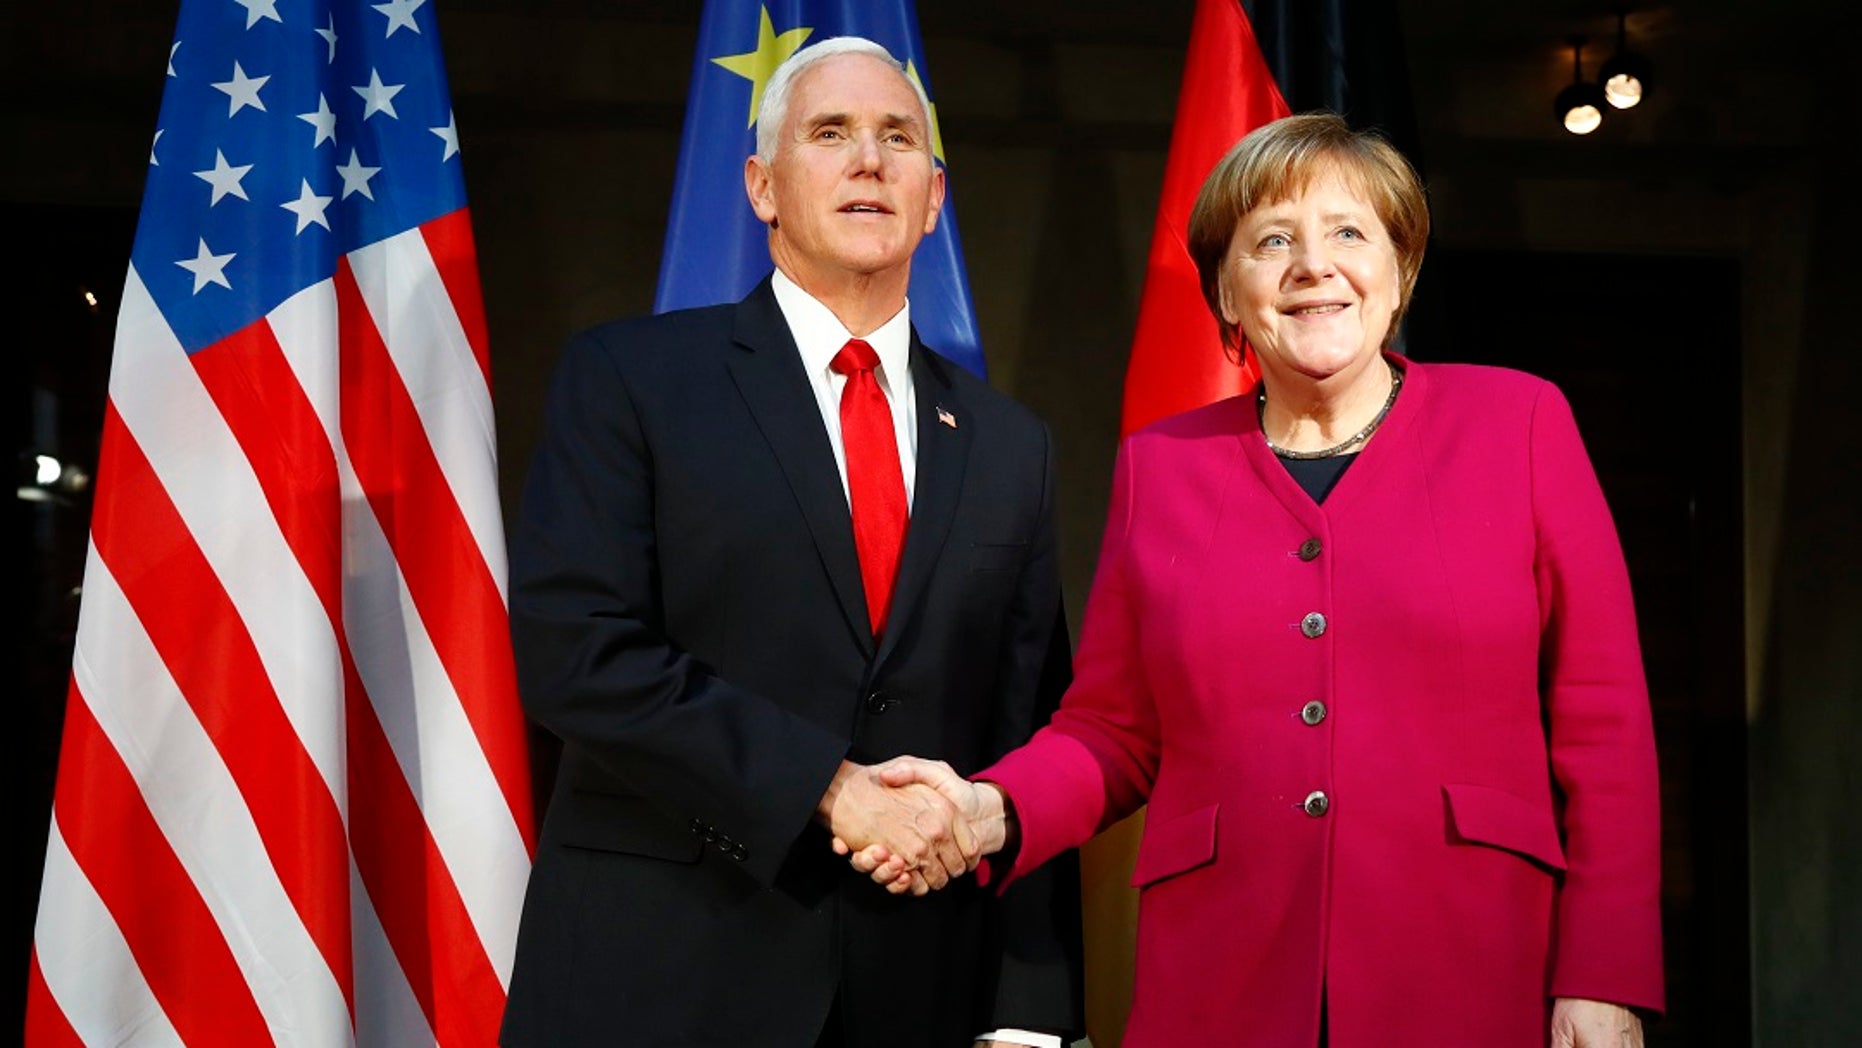 Vice President Mike Pence and German Chancellor Angela Merkel meet at the Munich Security Conference in Munich, Germany, Feb. 16, 2019. (Associated Press)